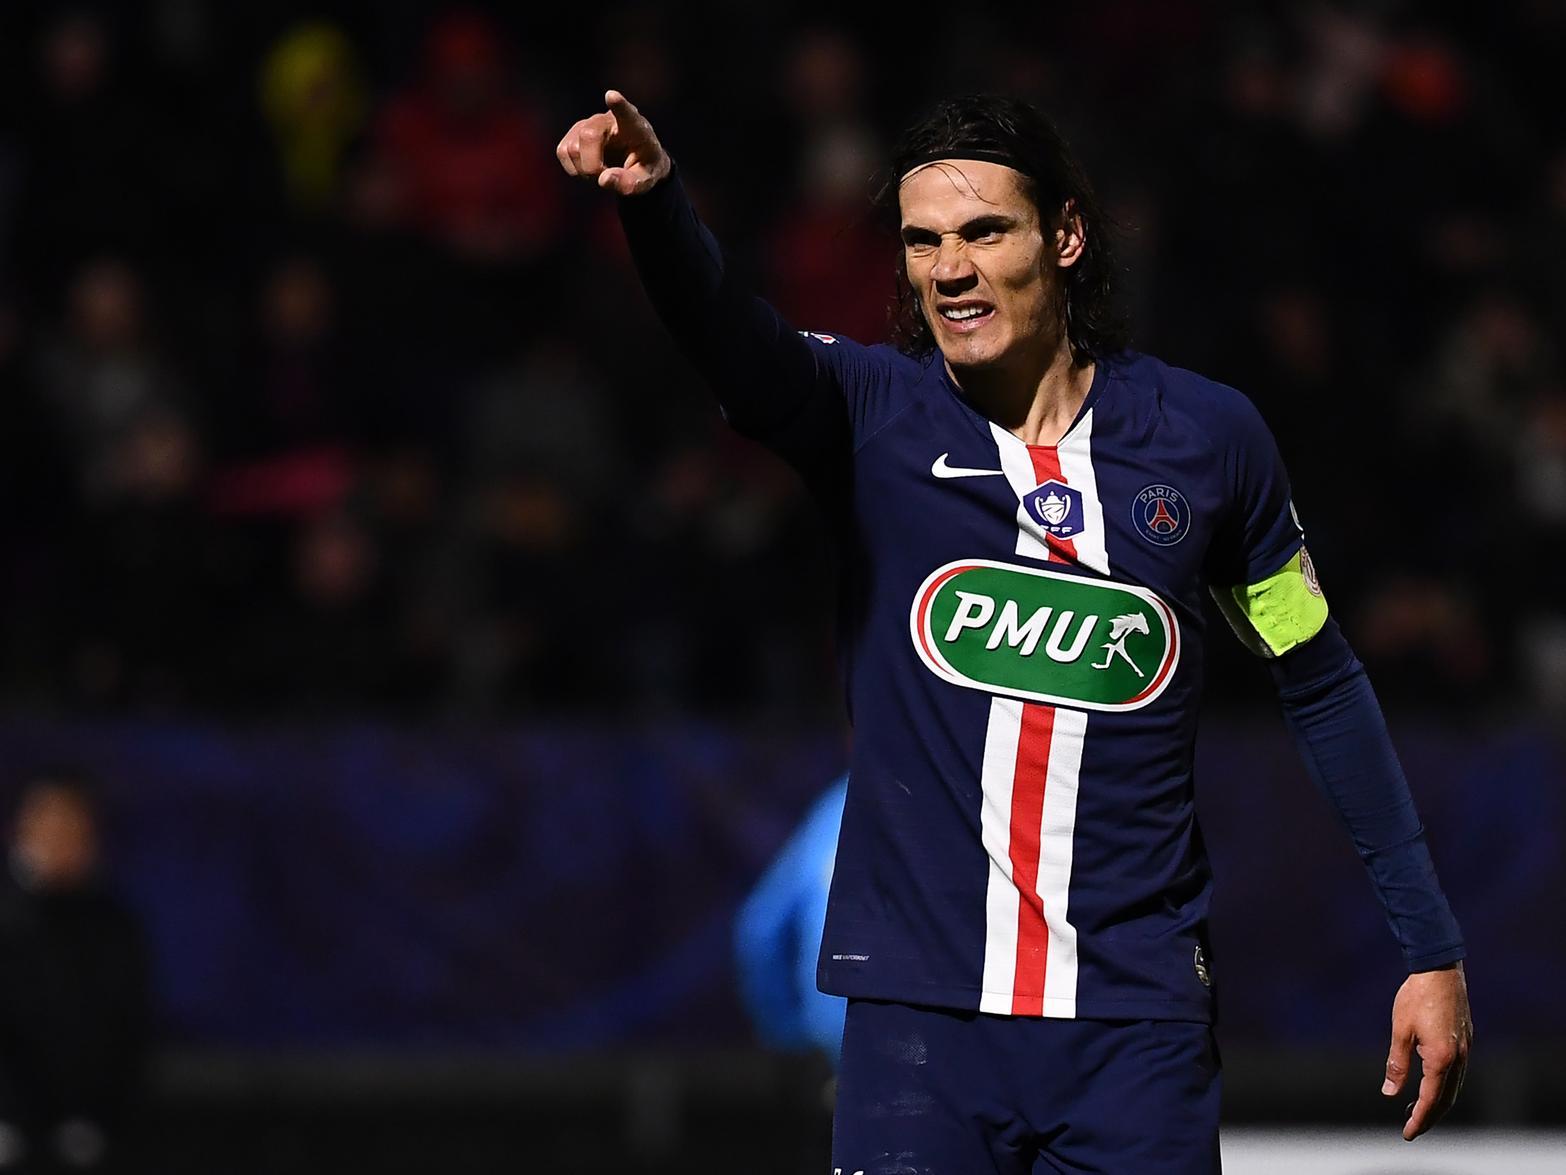 Arsenal and Manchester United have reportedly made offers for PSG striker Edison Cavani. (The Sun)